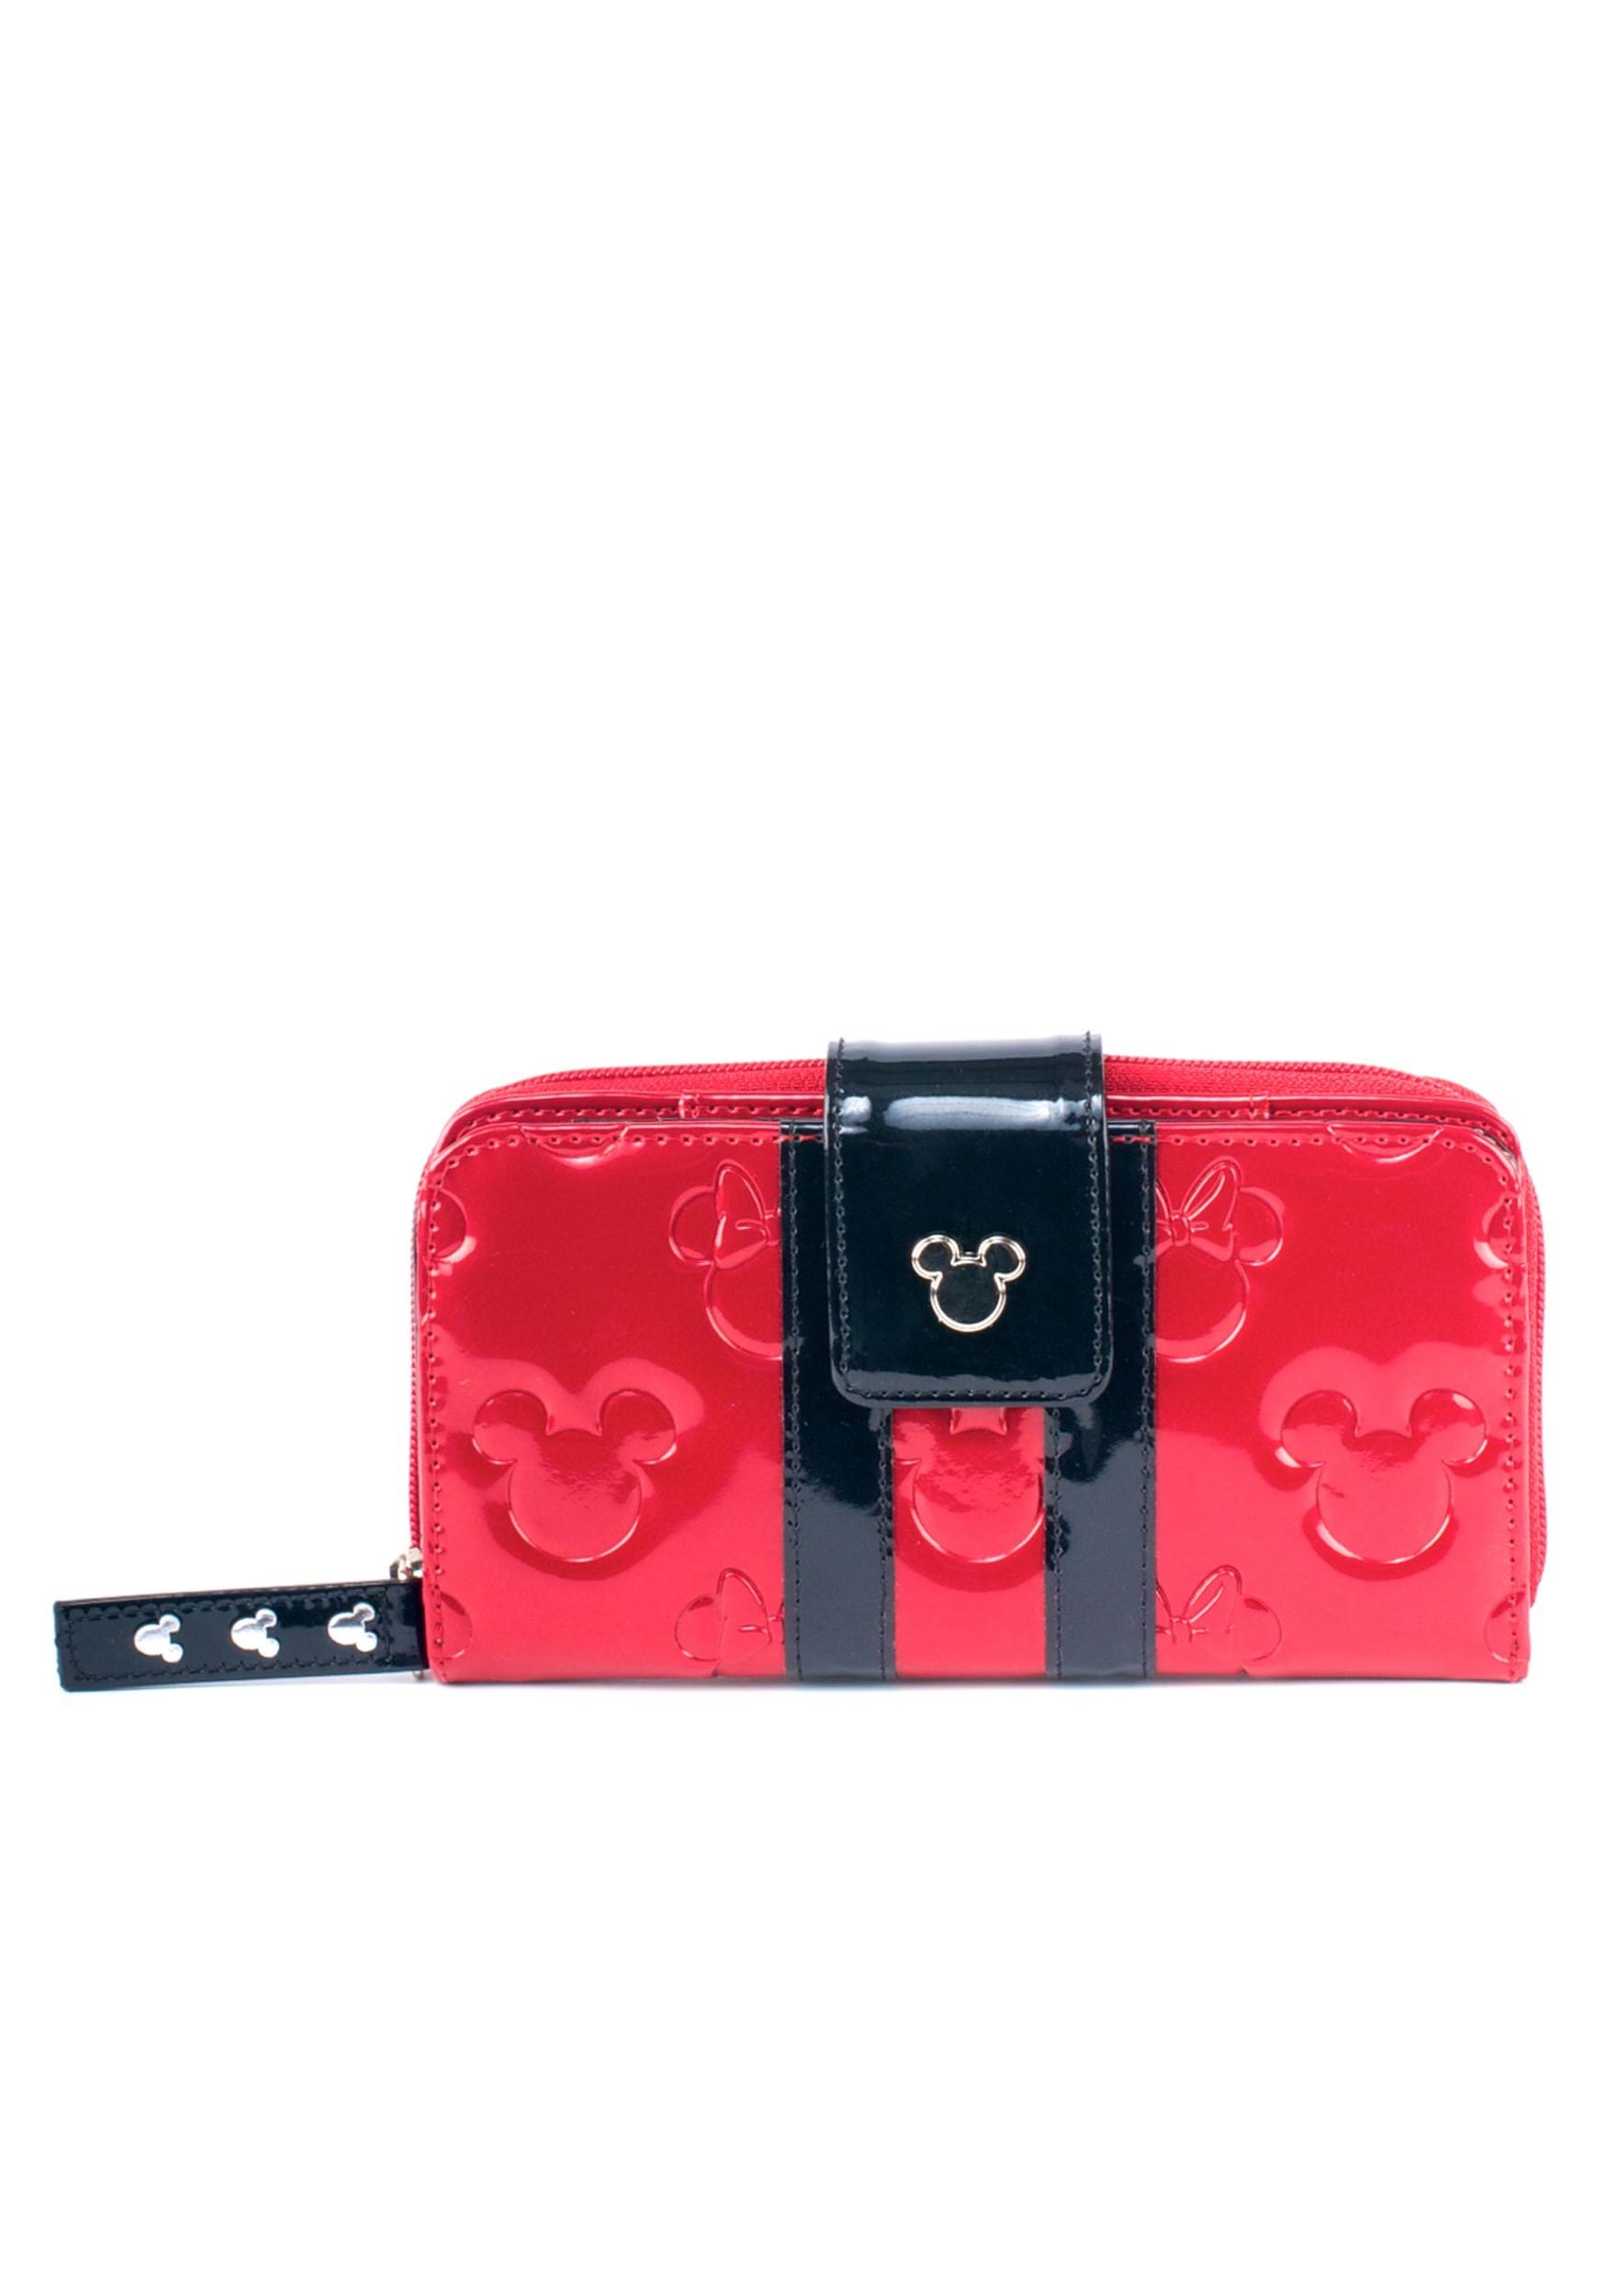 Loungefly Mickey and Minnie Red and Black Patent Embossed Wallet